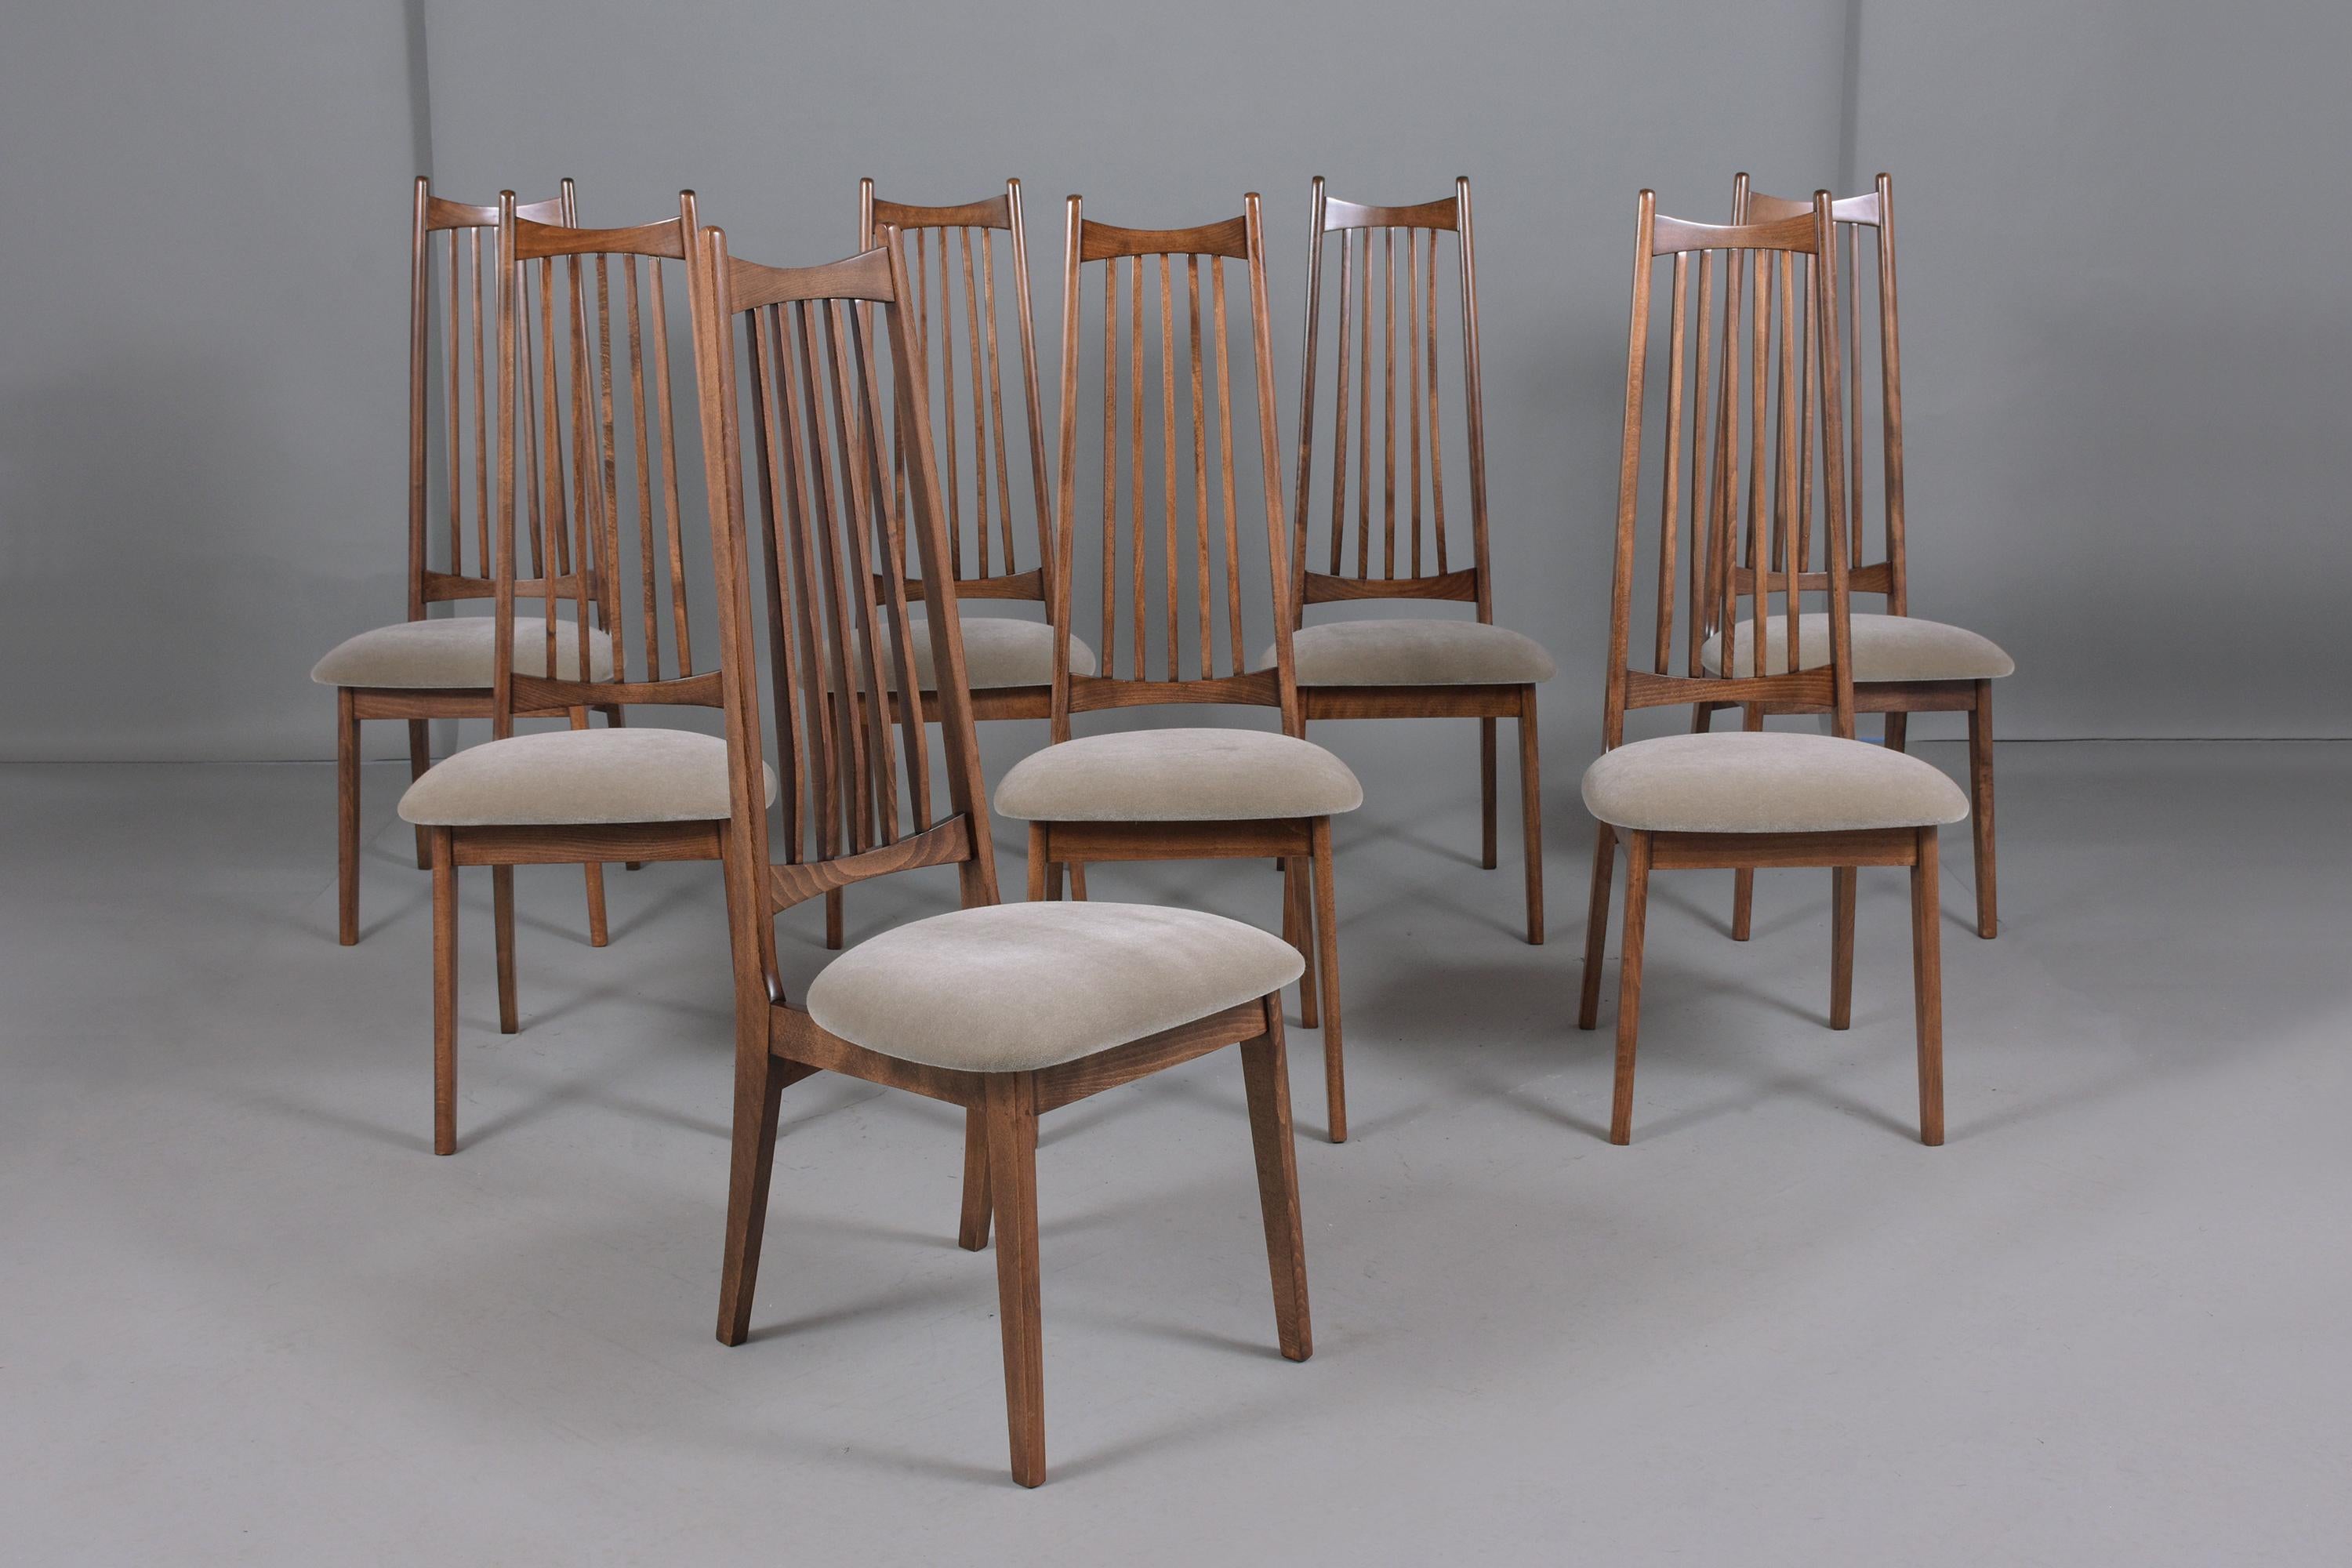 An excellent modern set of eight dining chairs attributed to Adrian Pearsall are hand-crafted out of solid wood professionally restored and newly refinished/upholstered by our craftsmen in the house. These fabulous dining chairs are newly stained in